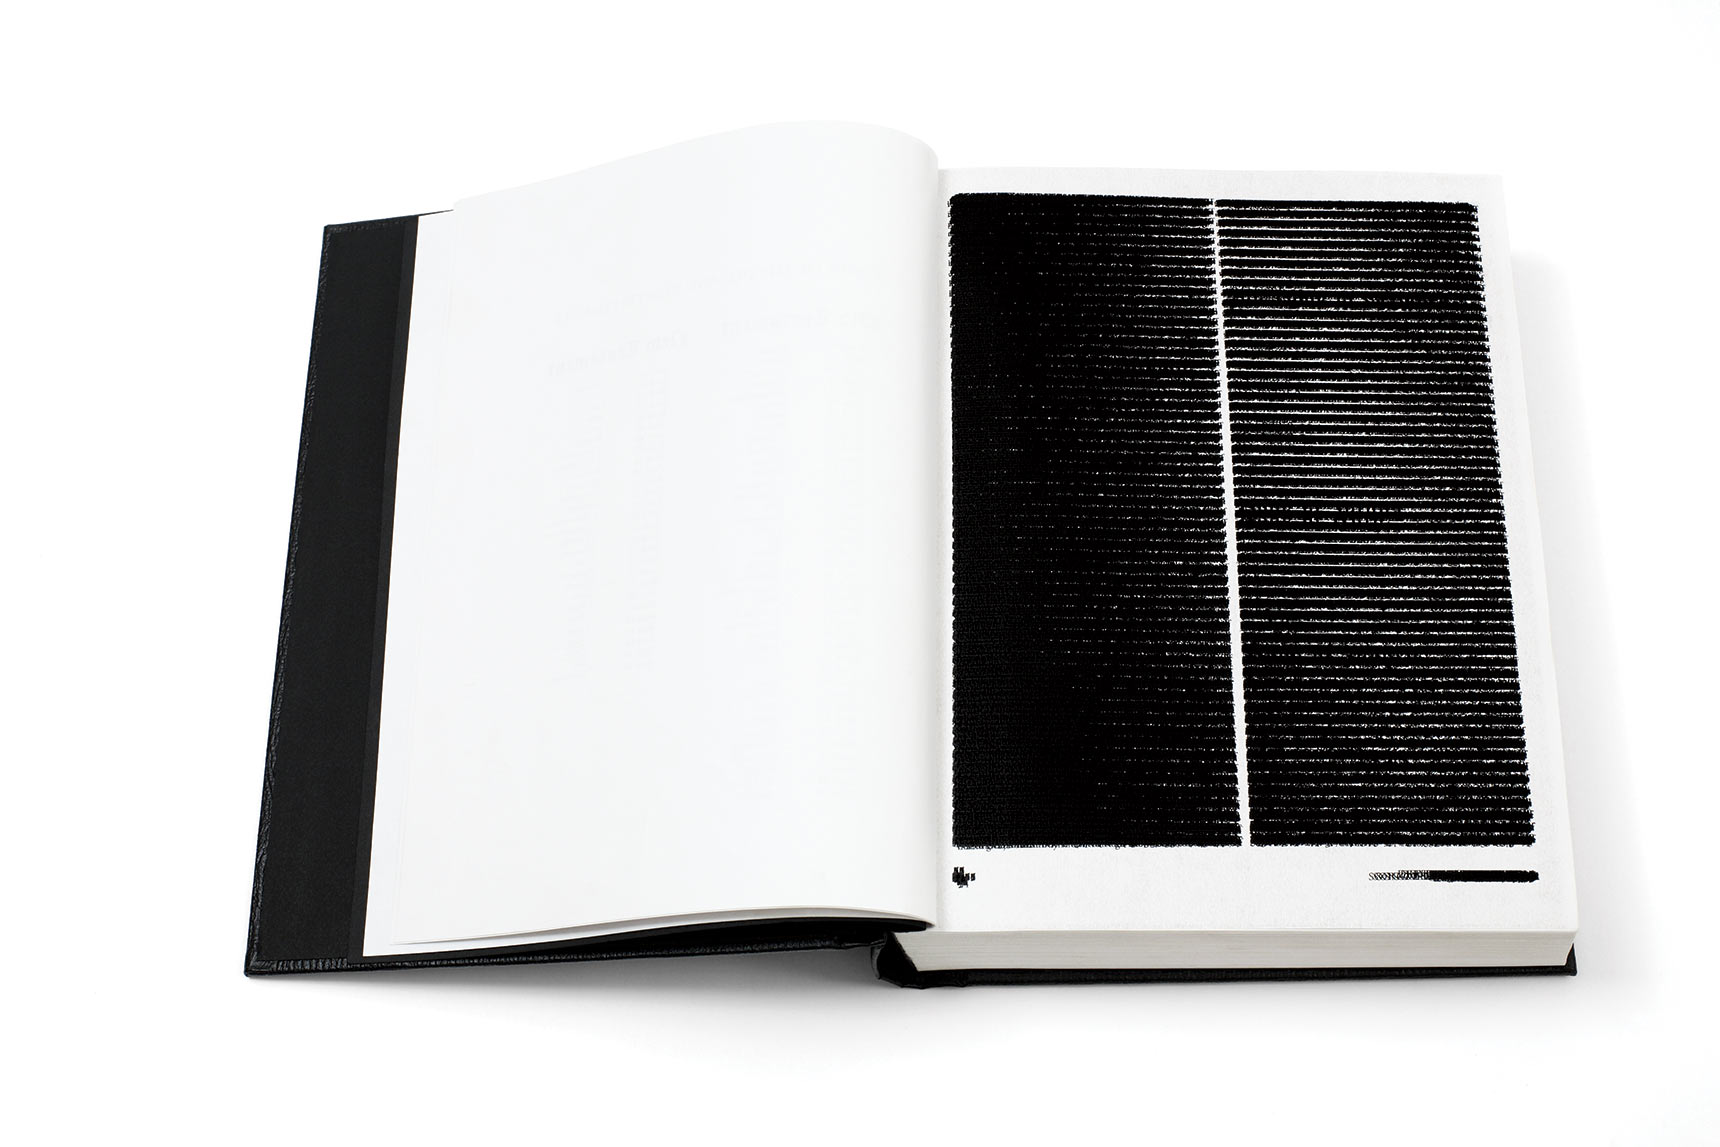 Post Typographic bible artist book, a full-sized bible with all of the text from the Old and New Testament overprinted on a single page. The remaining pages in the book are blank.